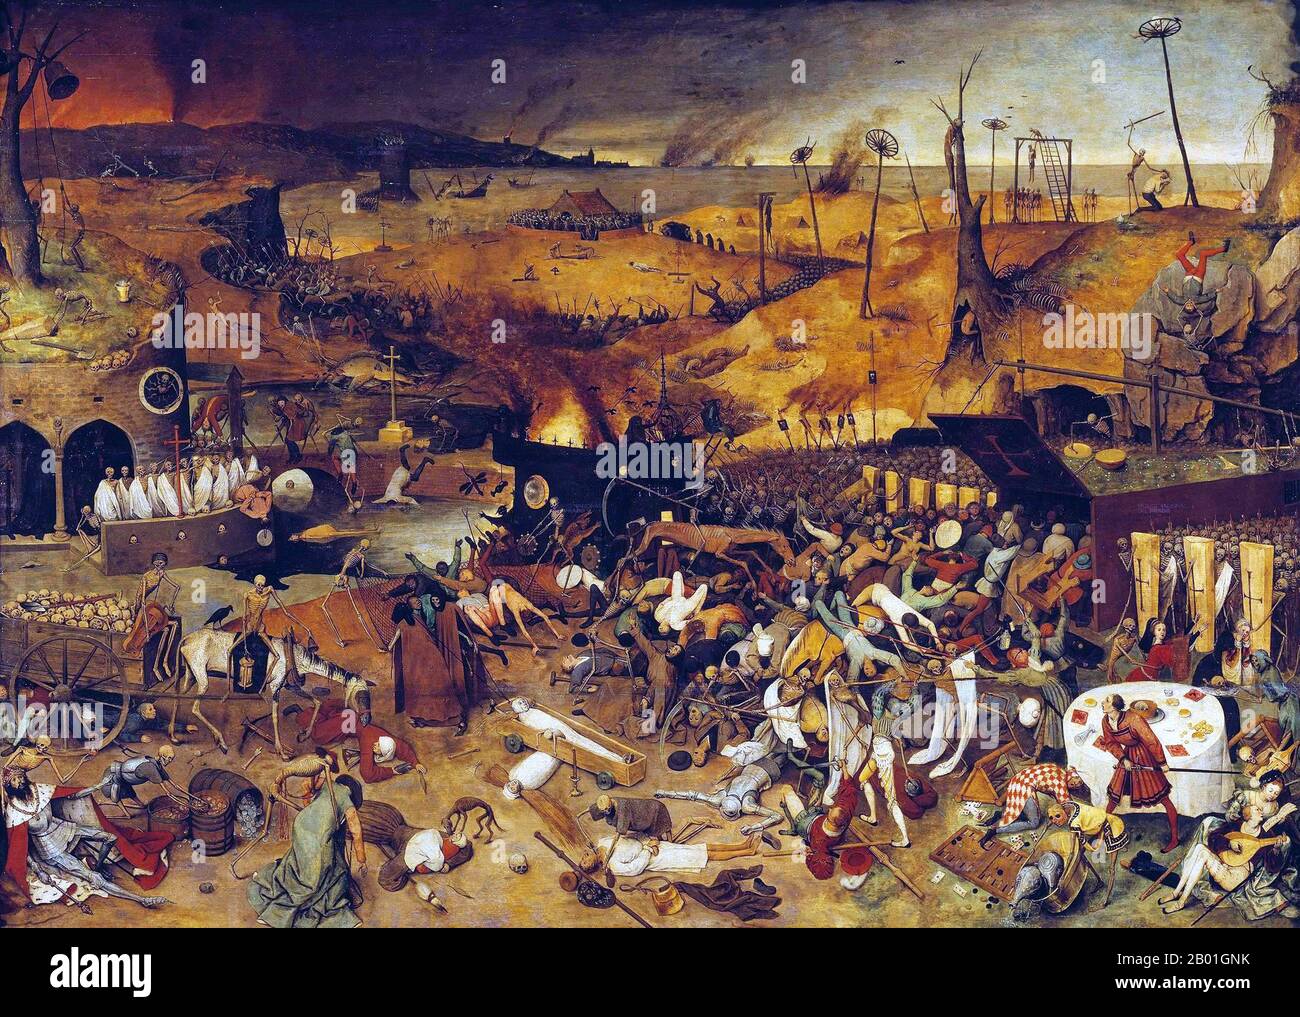 Belgium: 'The Triumph of Death'. Oil on panel painting by Pieter Brueghel the Elder (1526-1569), c. 1562.  The painting is a panoramic landscape: the sky in the distance is blackened by smoke from burning cities and the sea is littered with shipwrecks. Armies of skeletons advance on the living, who either flee in terror or try vainly to fight back. In the foreground, skeletons haul a wagon full of skulls, and ring the bell that signifies the death knell of the world. A fool plays the lute while a skeleton behind him plays along; a starving dog nibbles at the face of a child. Stock Photo